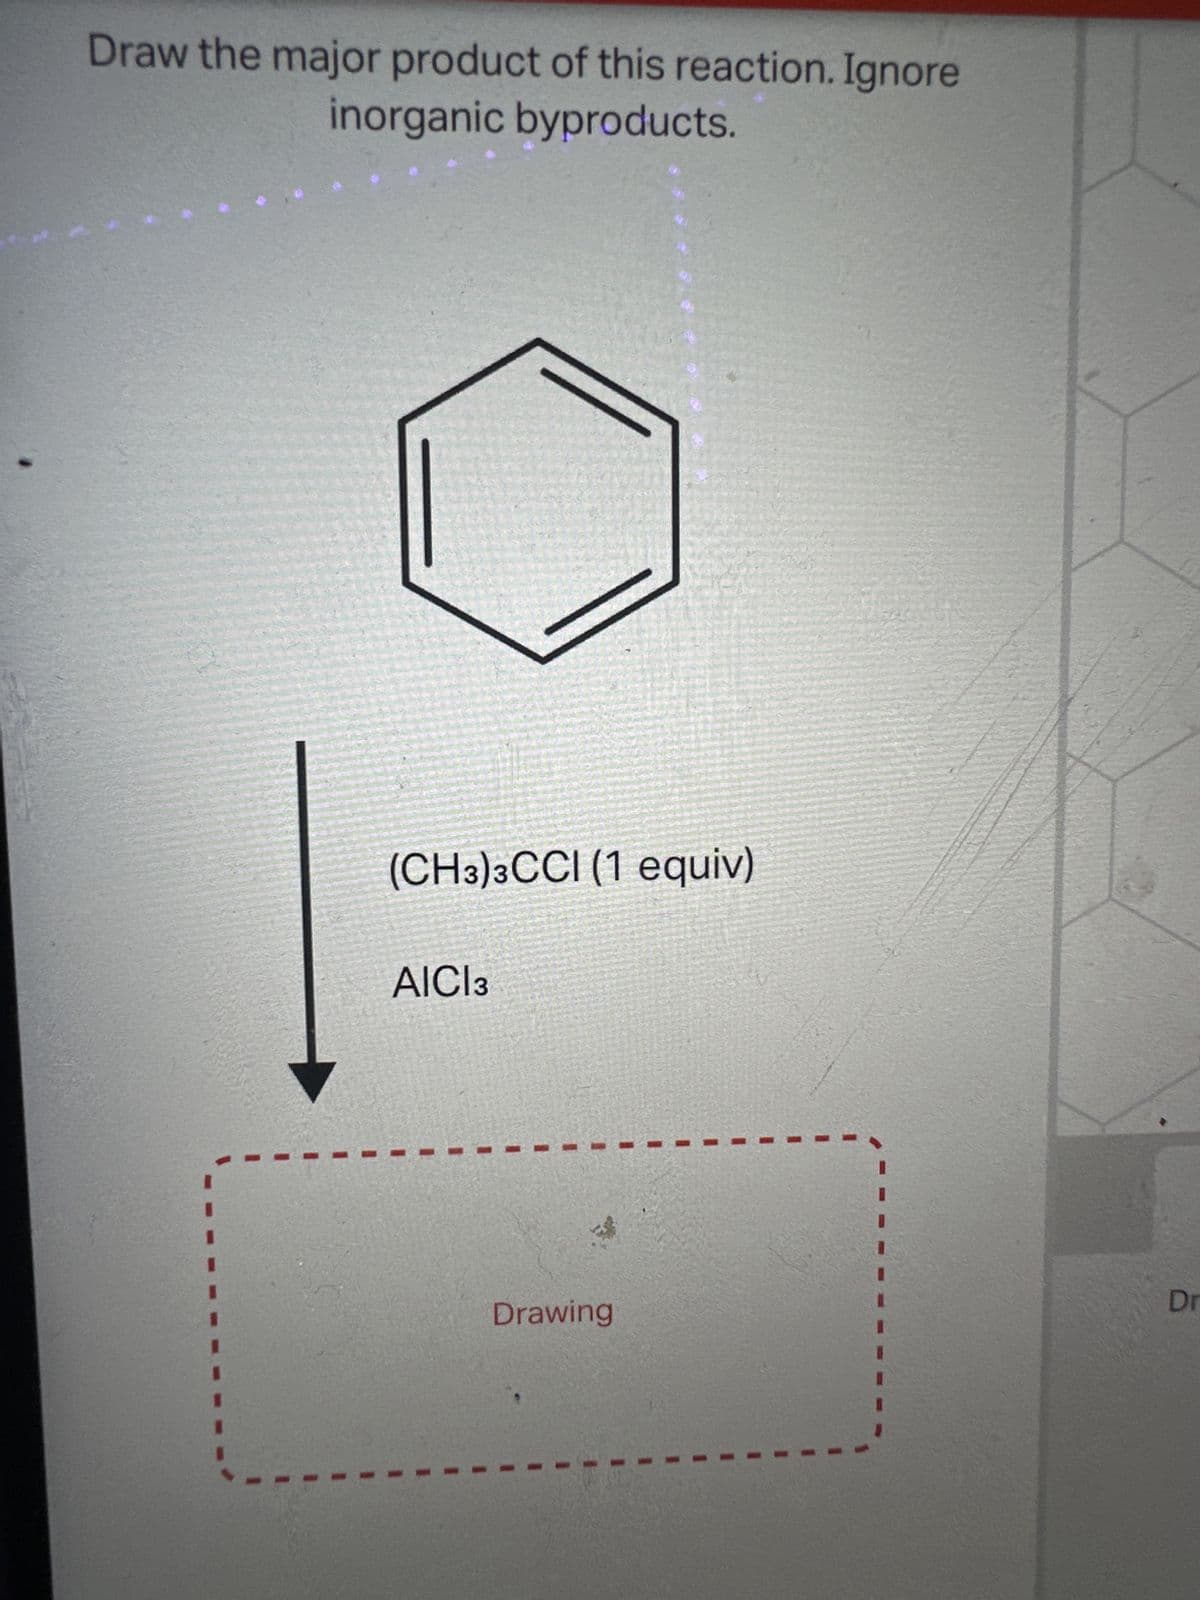 Draw the major product of this reaction. Ignore
inorganic byproducts.
(CH3)3CCI (1 equiv)
AICI 3
Drawing
I
"1
Dr